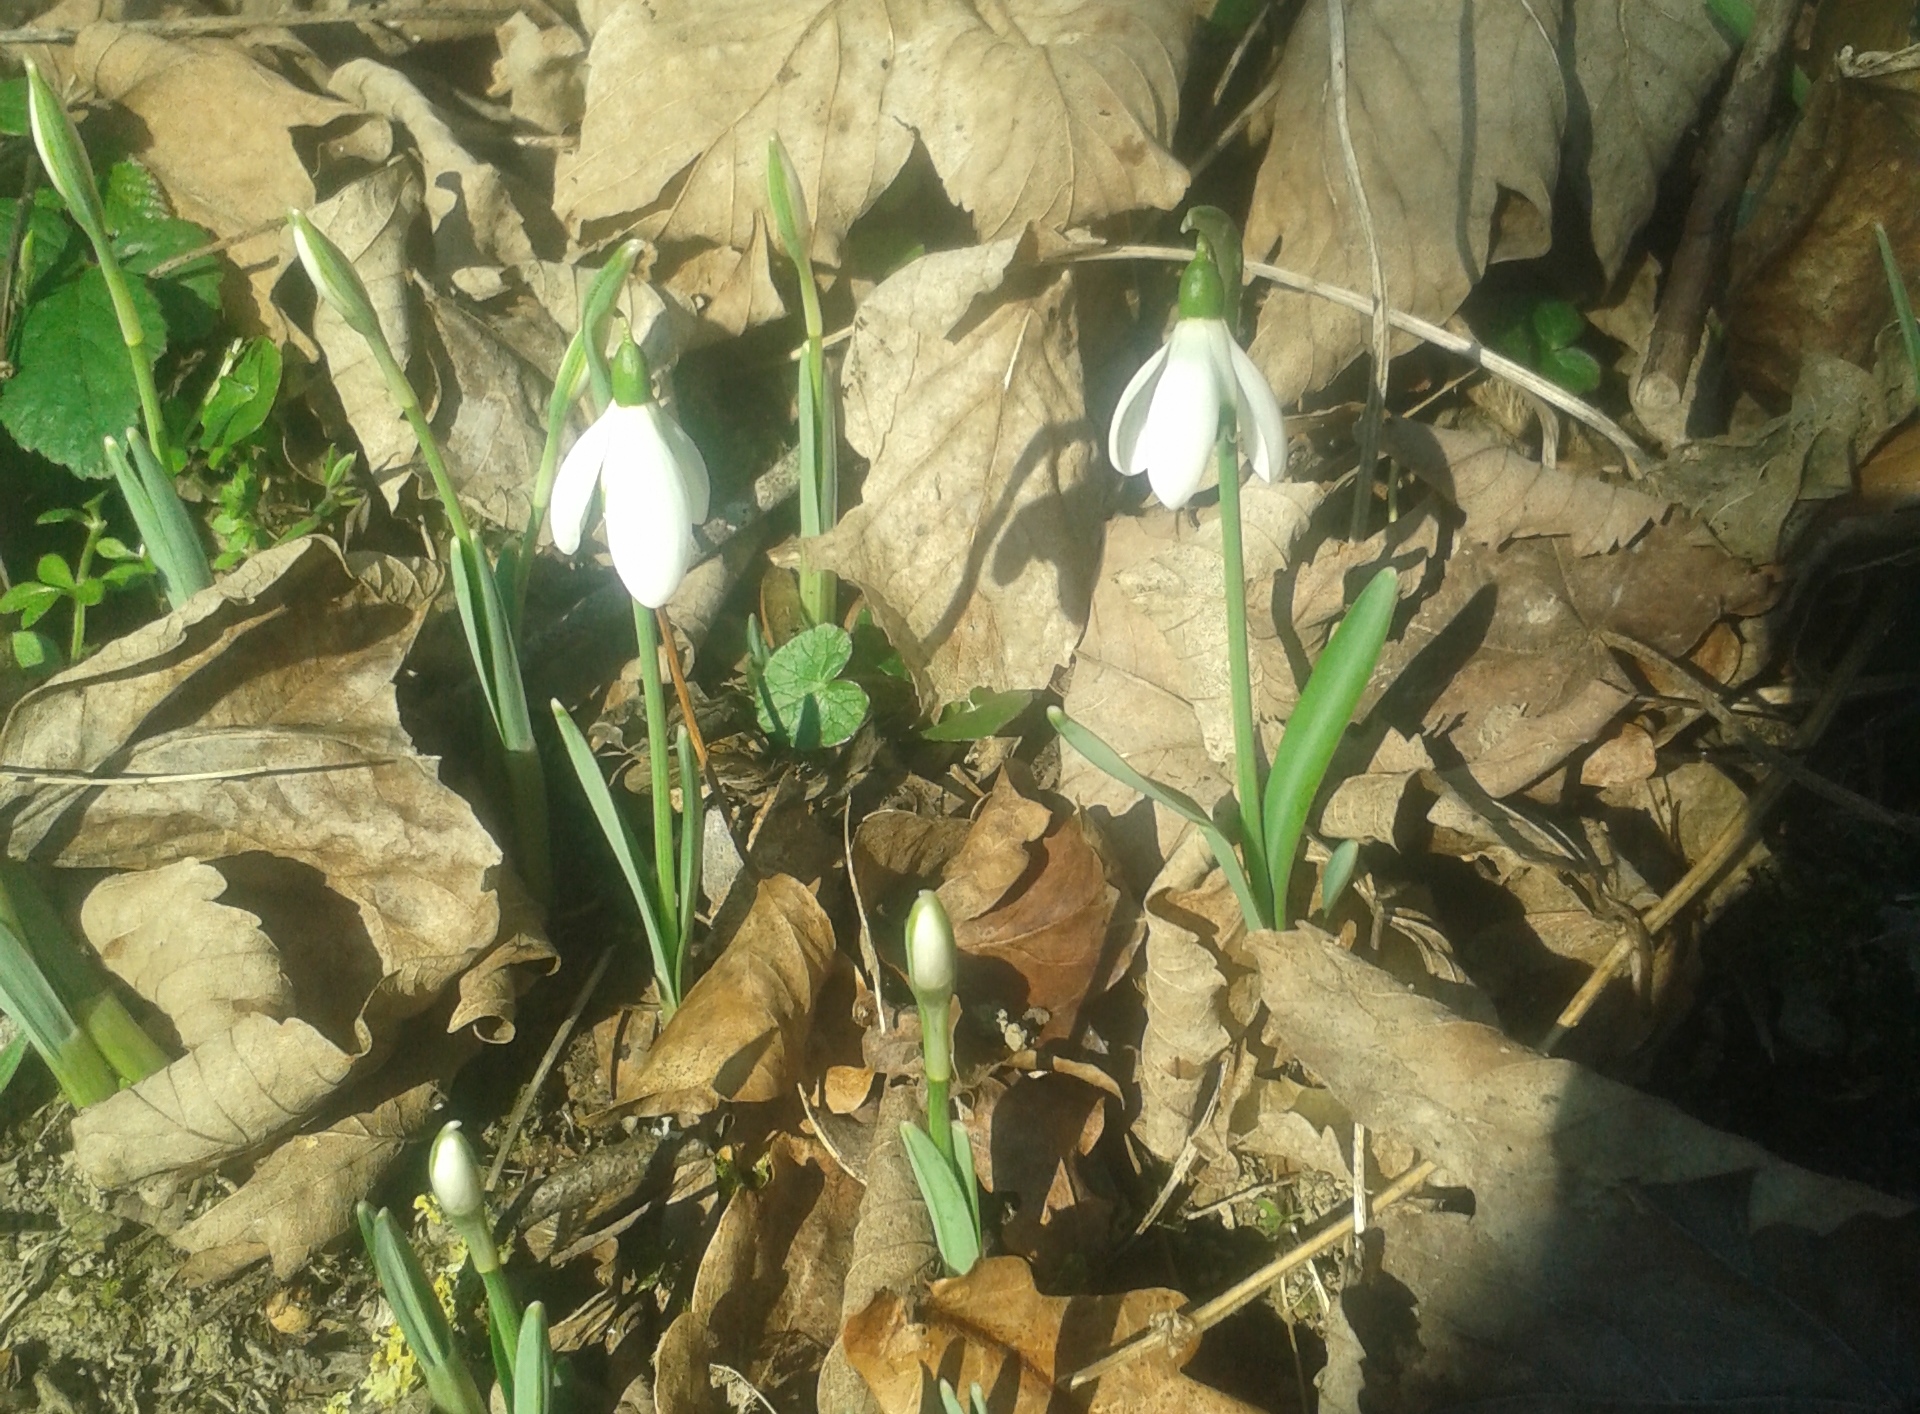 Snowdrops near Eco-Gites of Lenault, a holiday home in Normandy